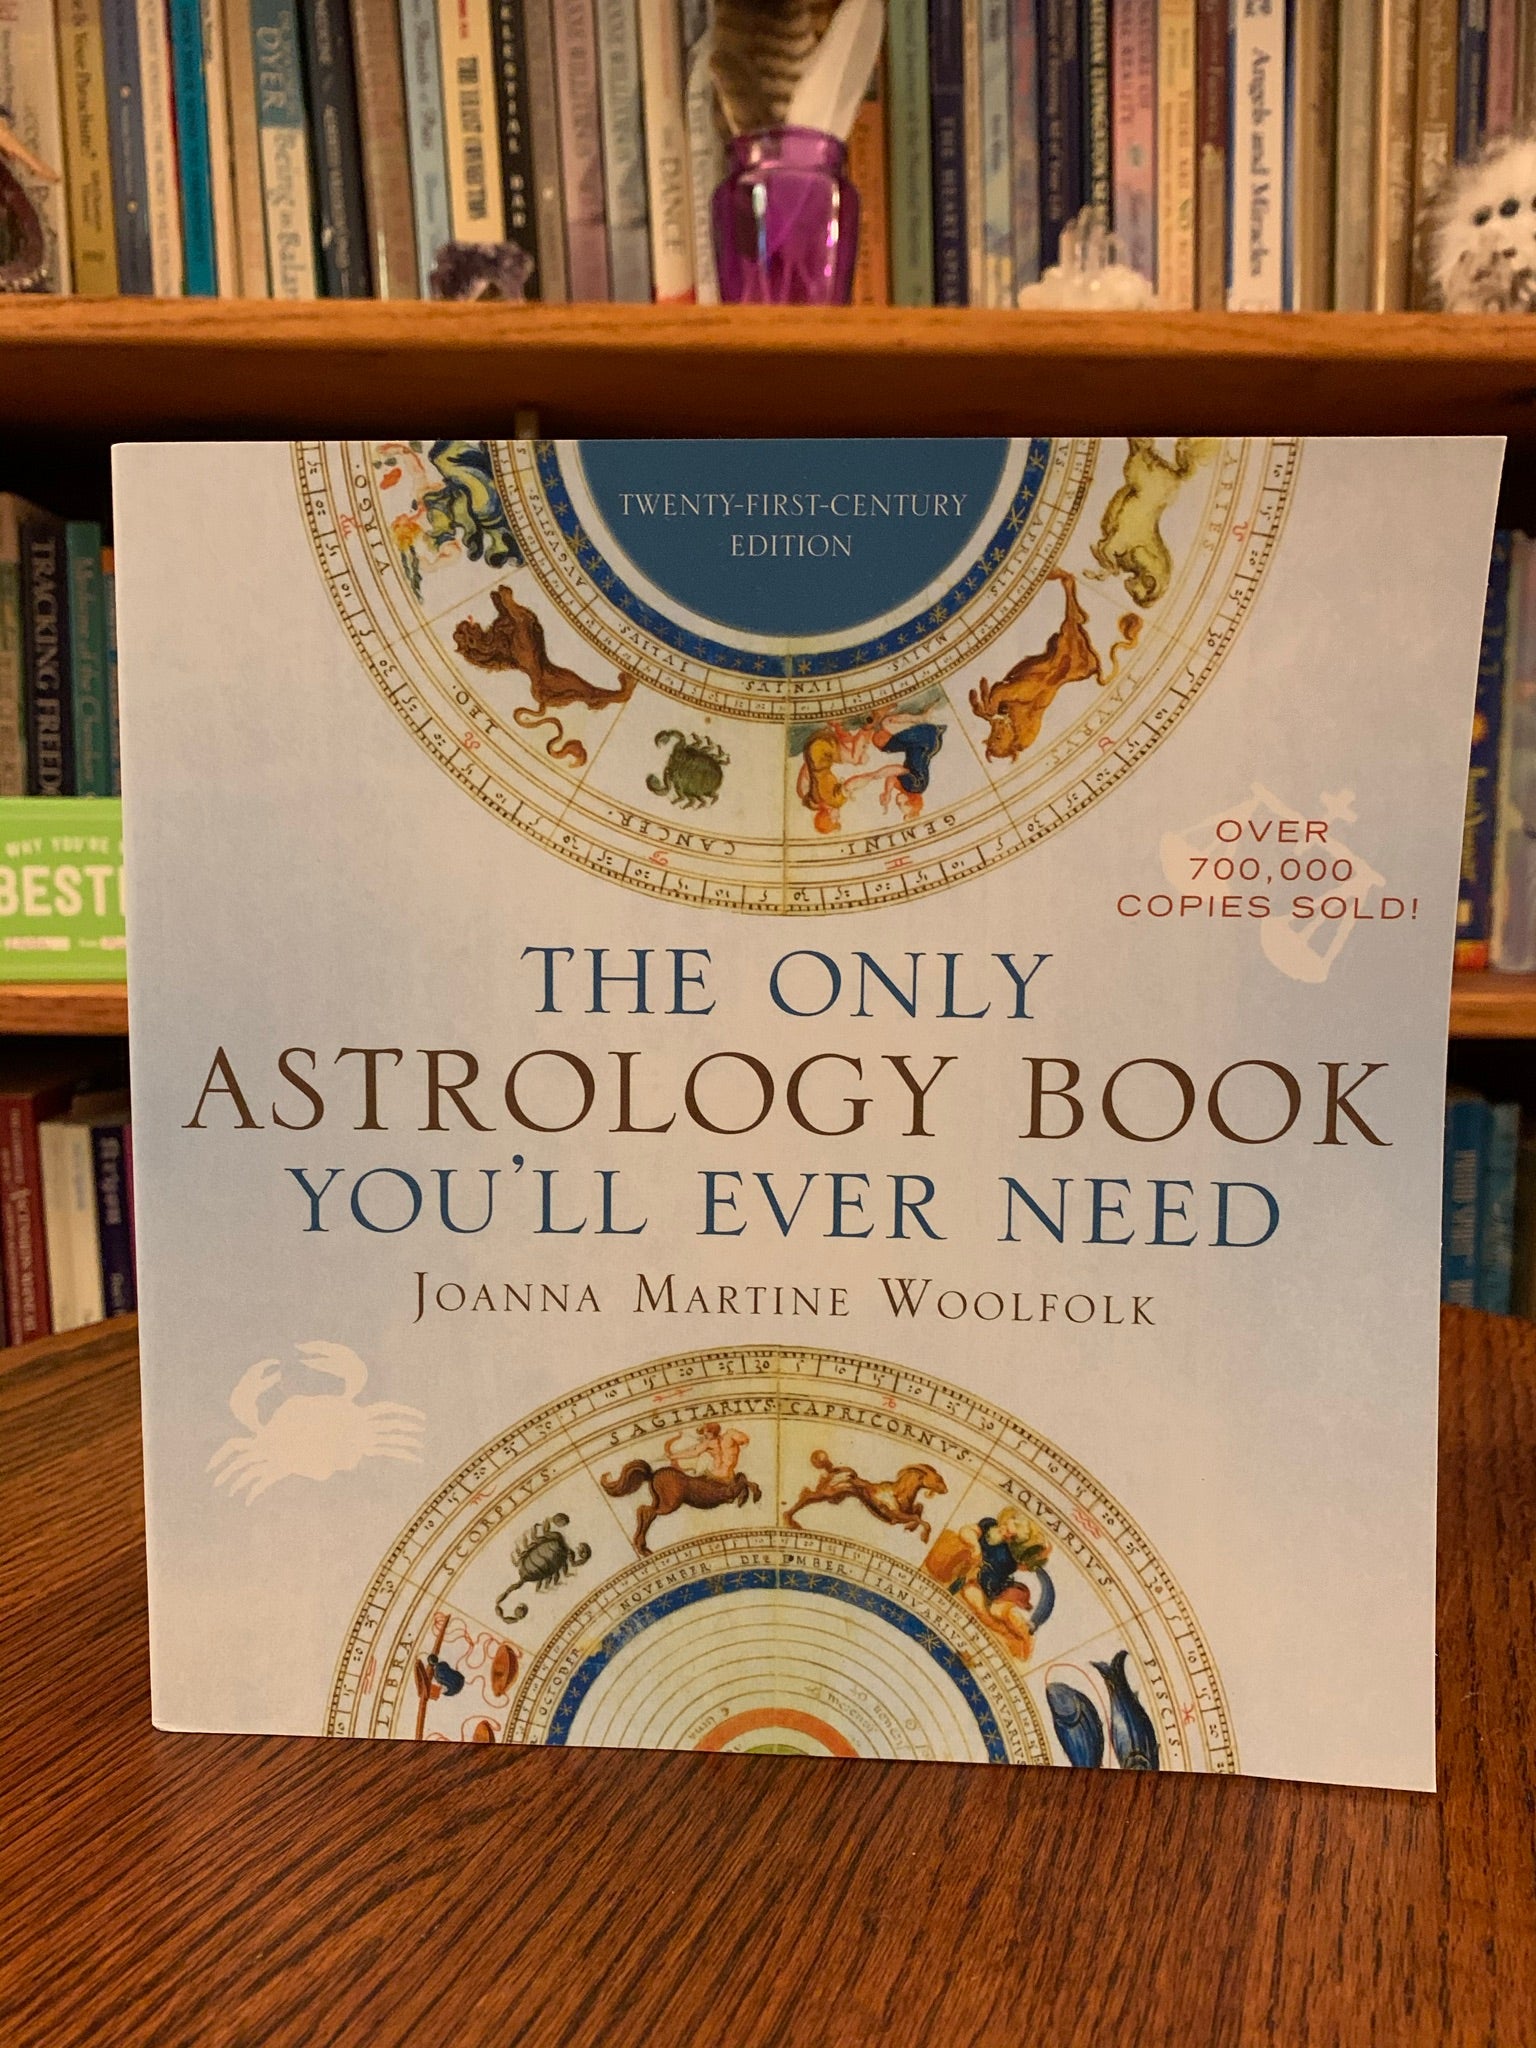 Front cover. This new, updated edition is packed with updated information on Sun signs, Moon signs, Ascending signs, the placement of Planets in your Houses, and the latest astronomical discoveries. It provides the compatibility between every sign (144 combinations) and dispenses advice about health, money, lifestyle, and romance, while also offering advice on dealing with the negative aspects of each sign. Woolfolk even discusses the new developments in the field of astronomy. Cost is $19.95.